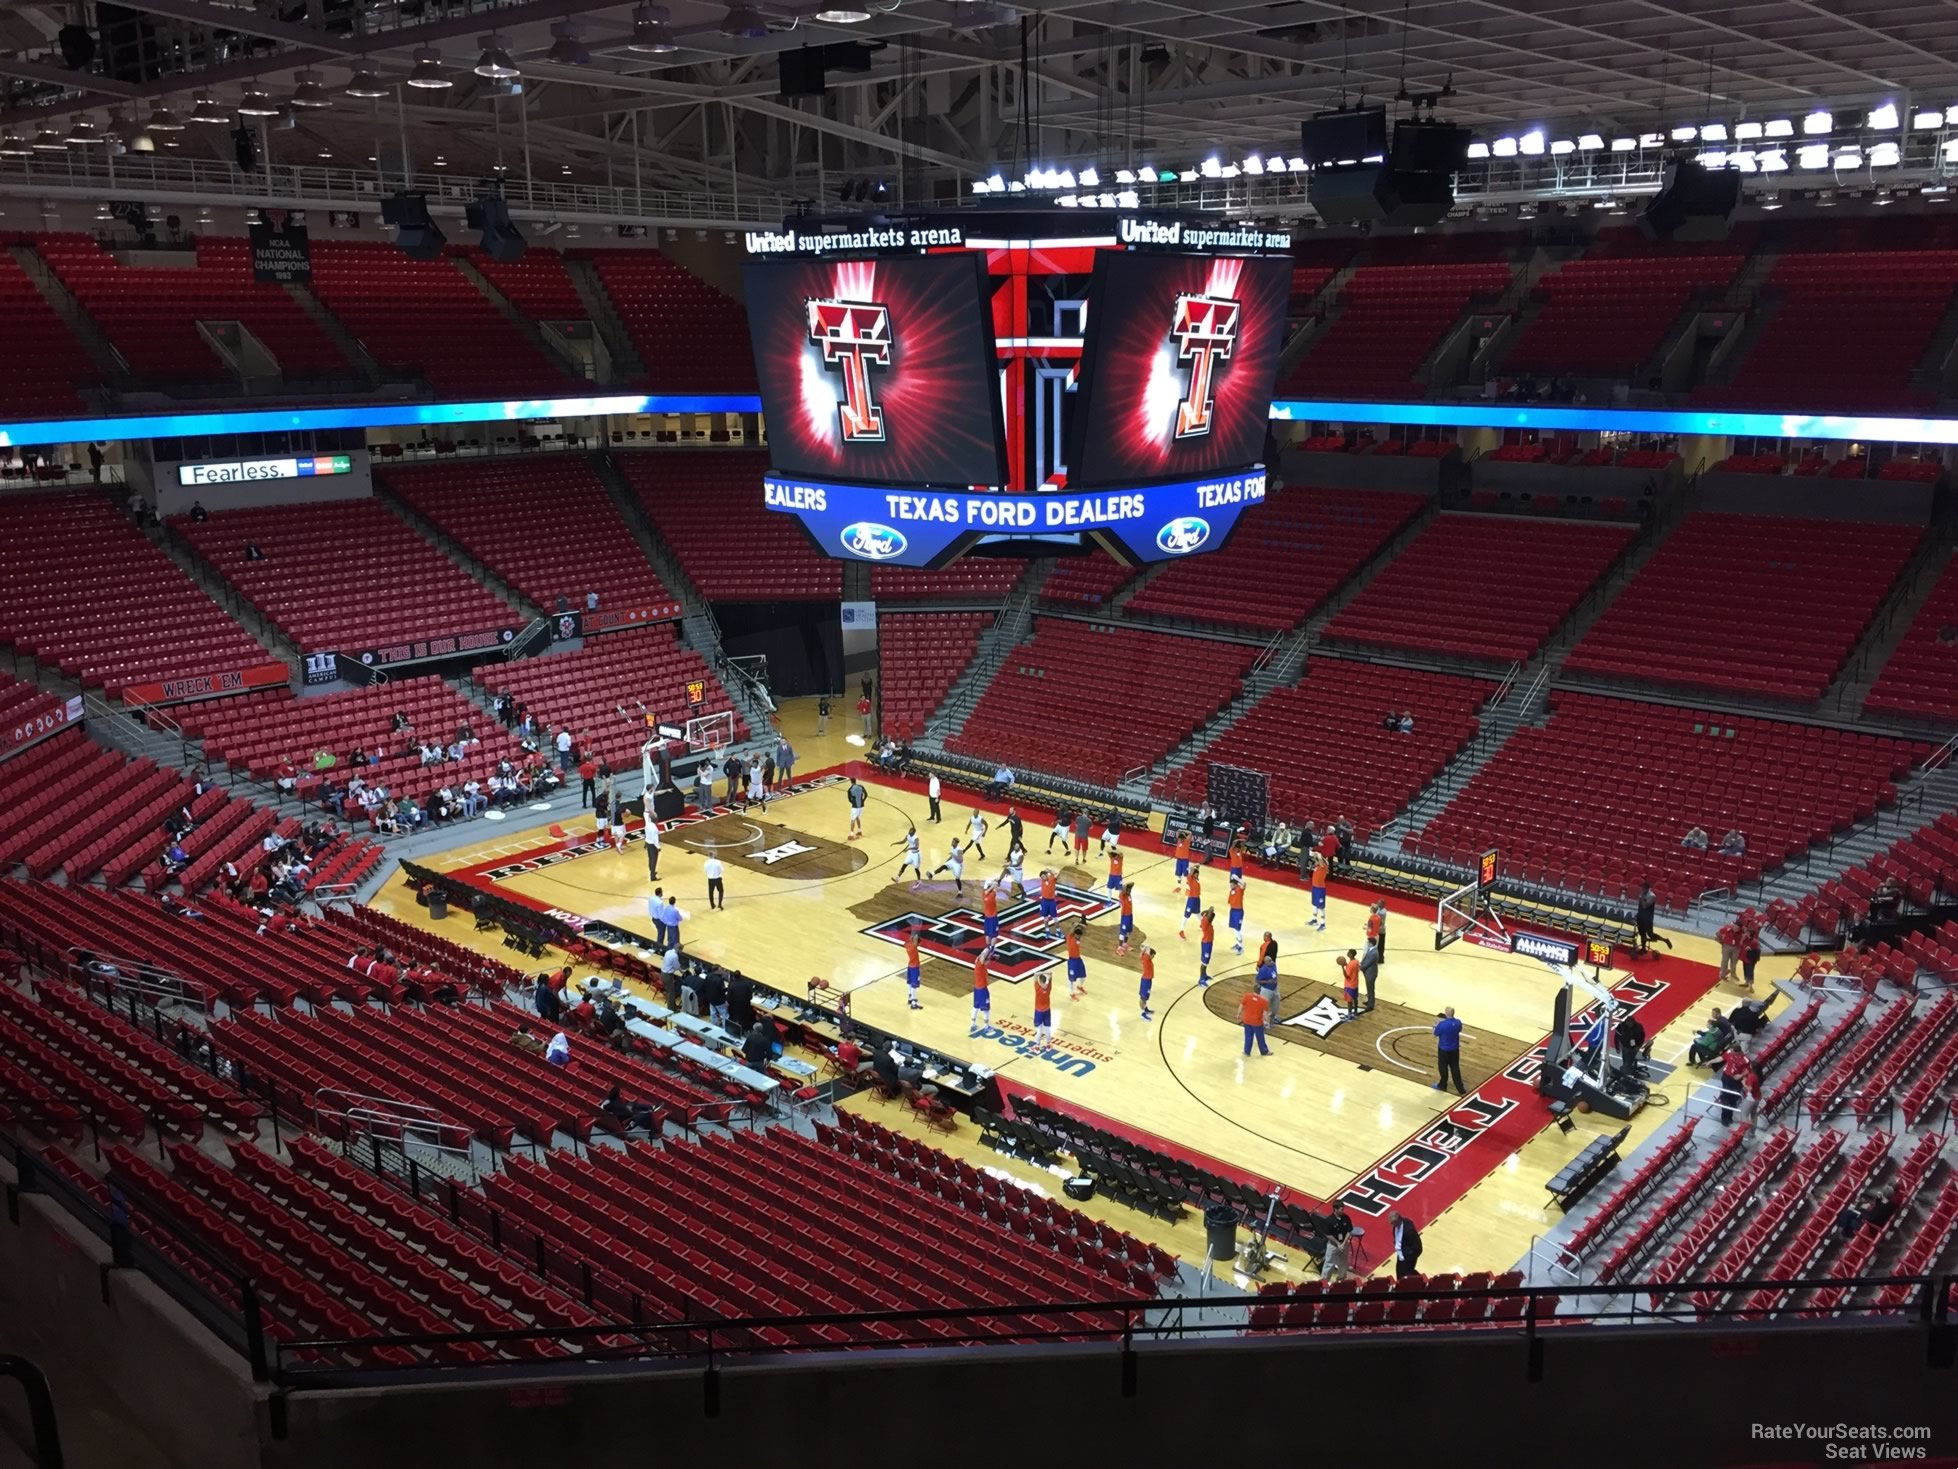 section 213, row 7 seat view  - united supermarkets arena